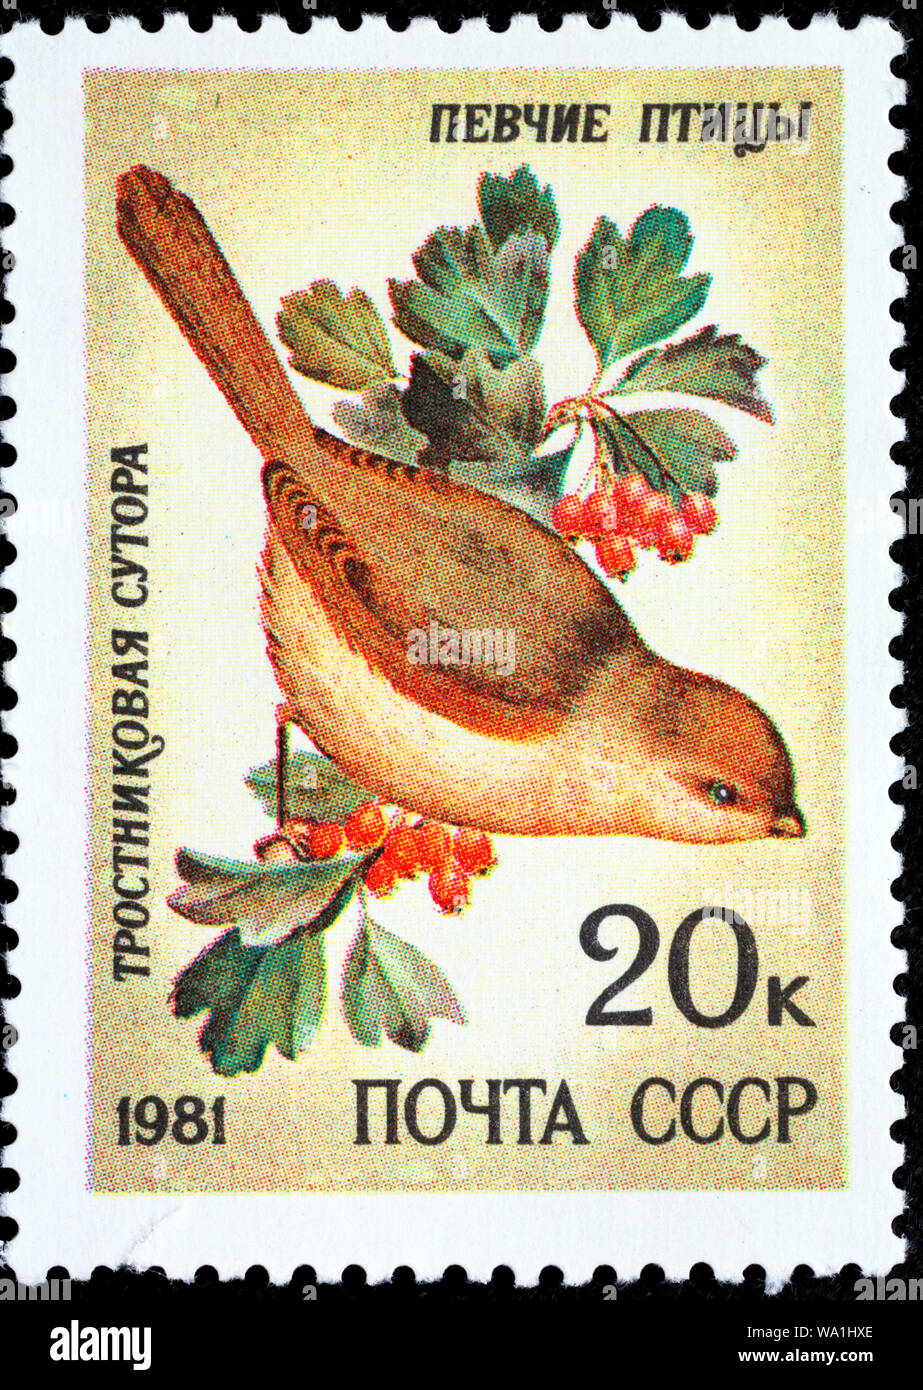 Vinous-throated Parrotbill, Paradoxornis webbianus, Song bird, postage stamp, Russia, USSR, 1981 Stock Photo